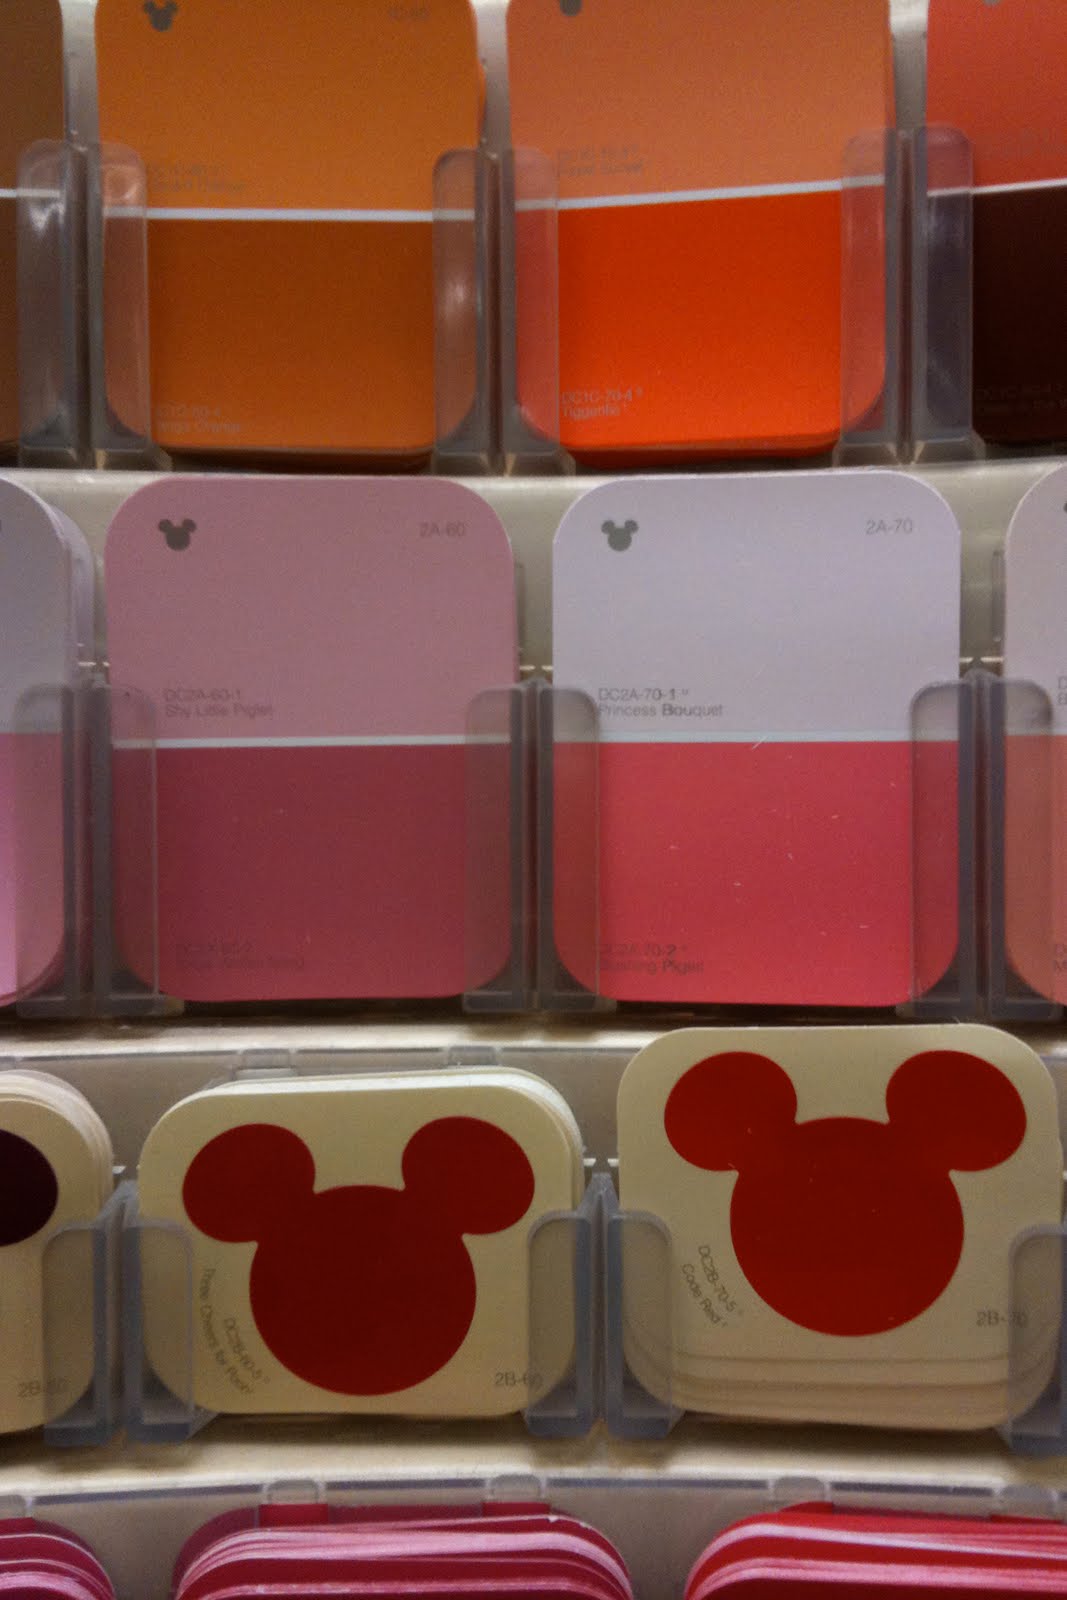 Disney Paint Swatches From Endearing Home Depot Paint Design ...